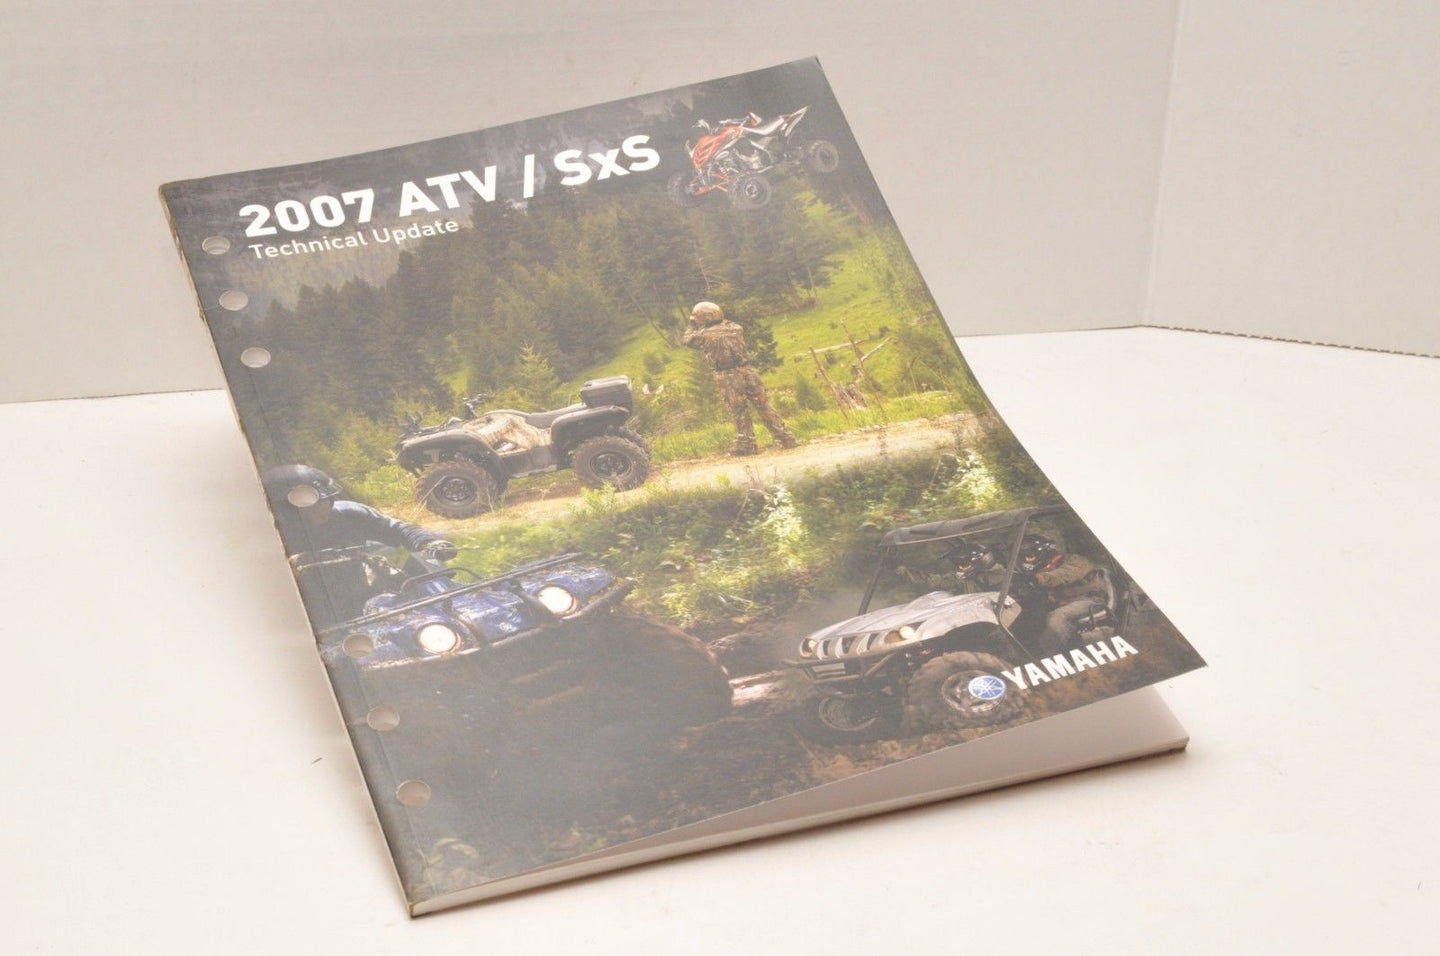 Genuine YAMAHA TECHNICAL UPDATE MANUAL ATV SxS SIDE BY LIT-17500-AT-07 2007